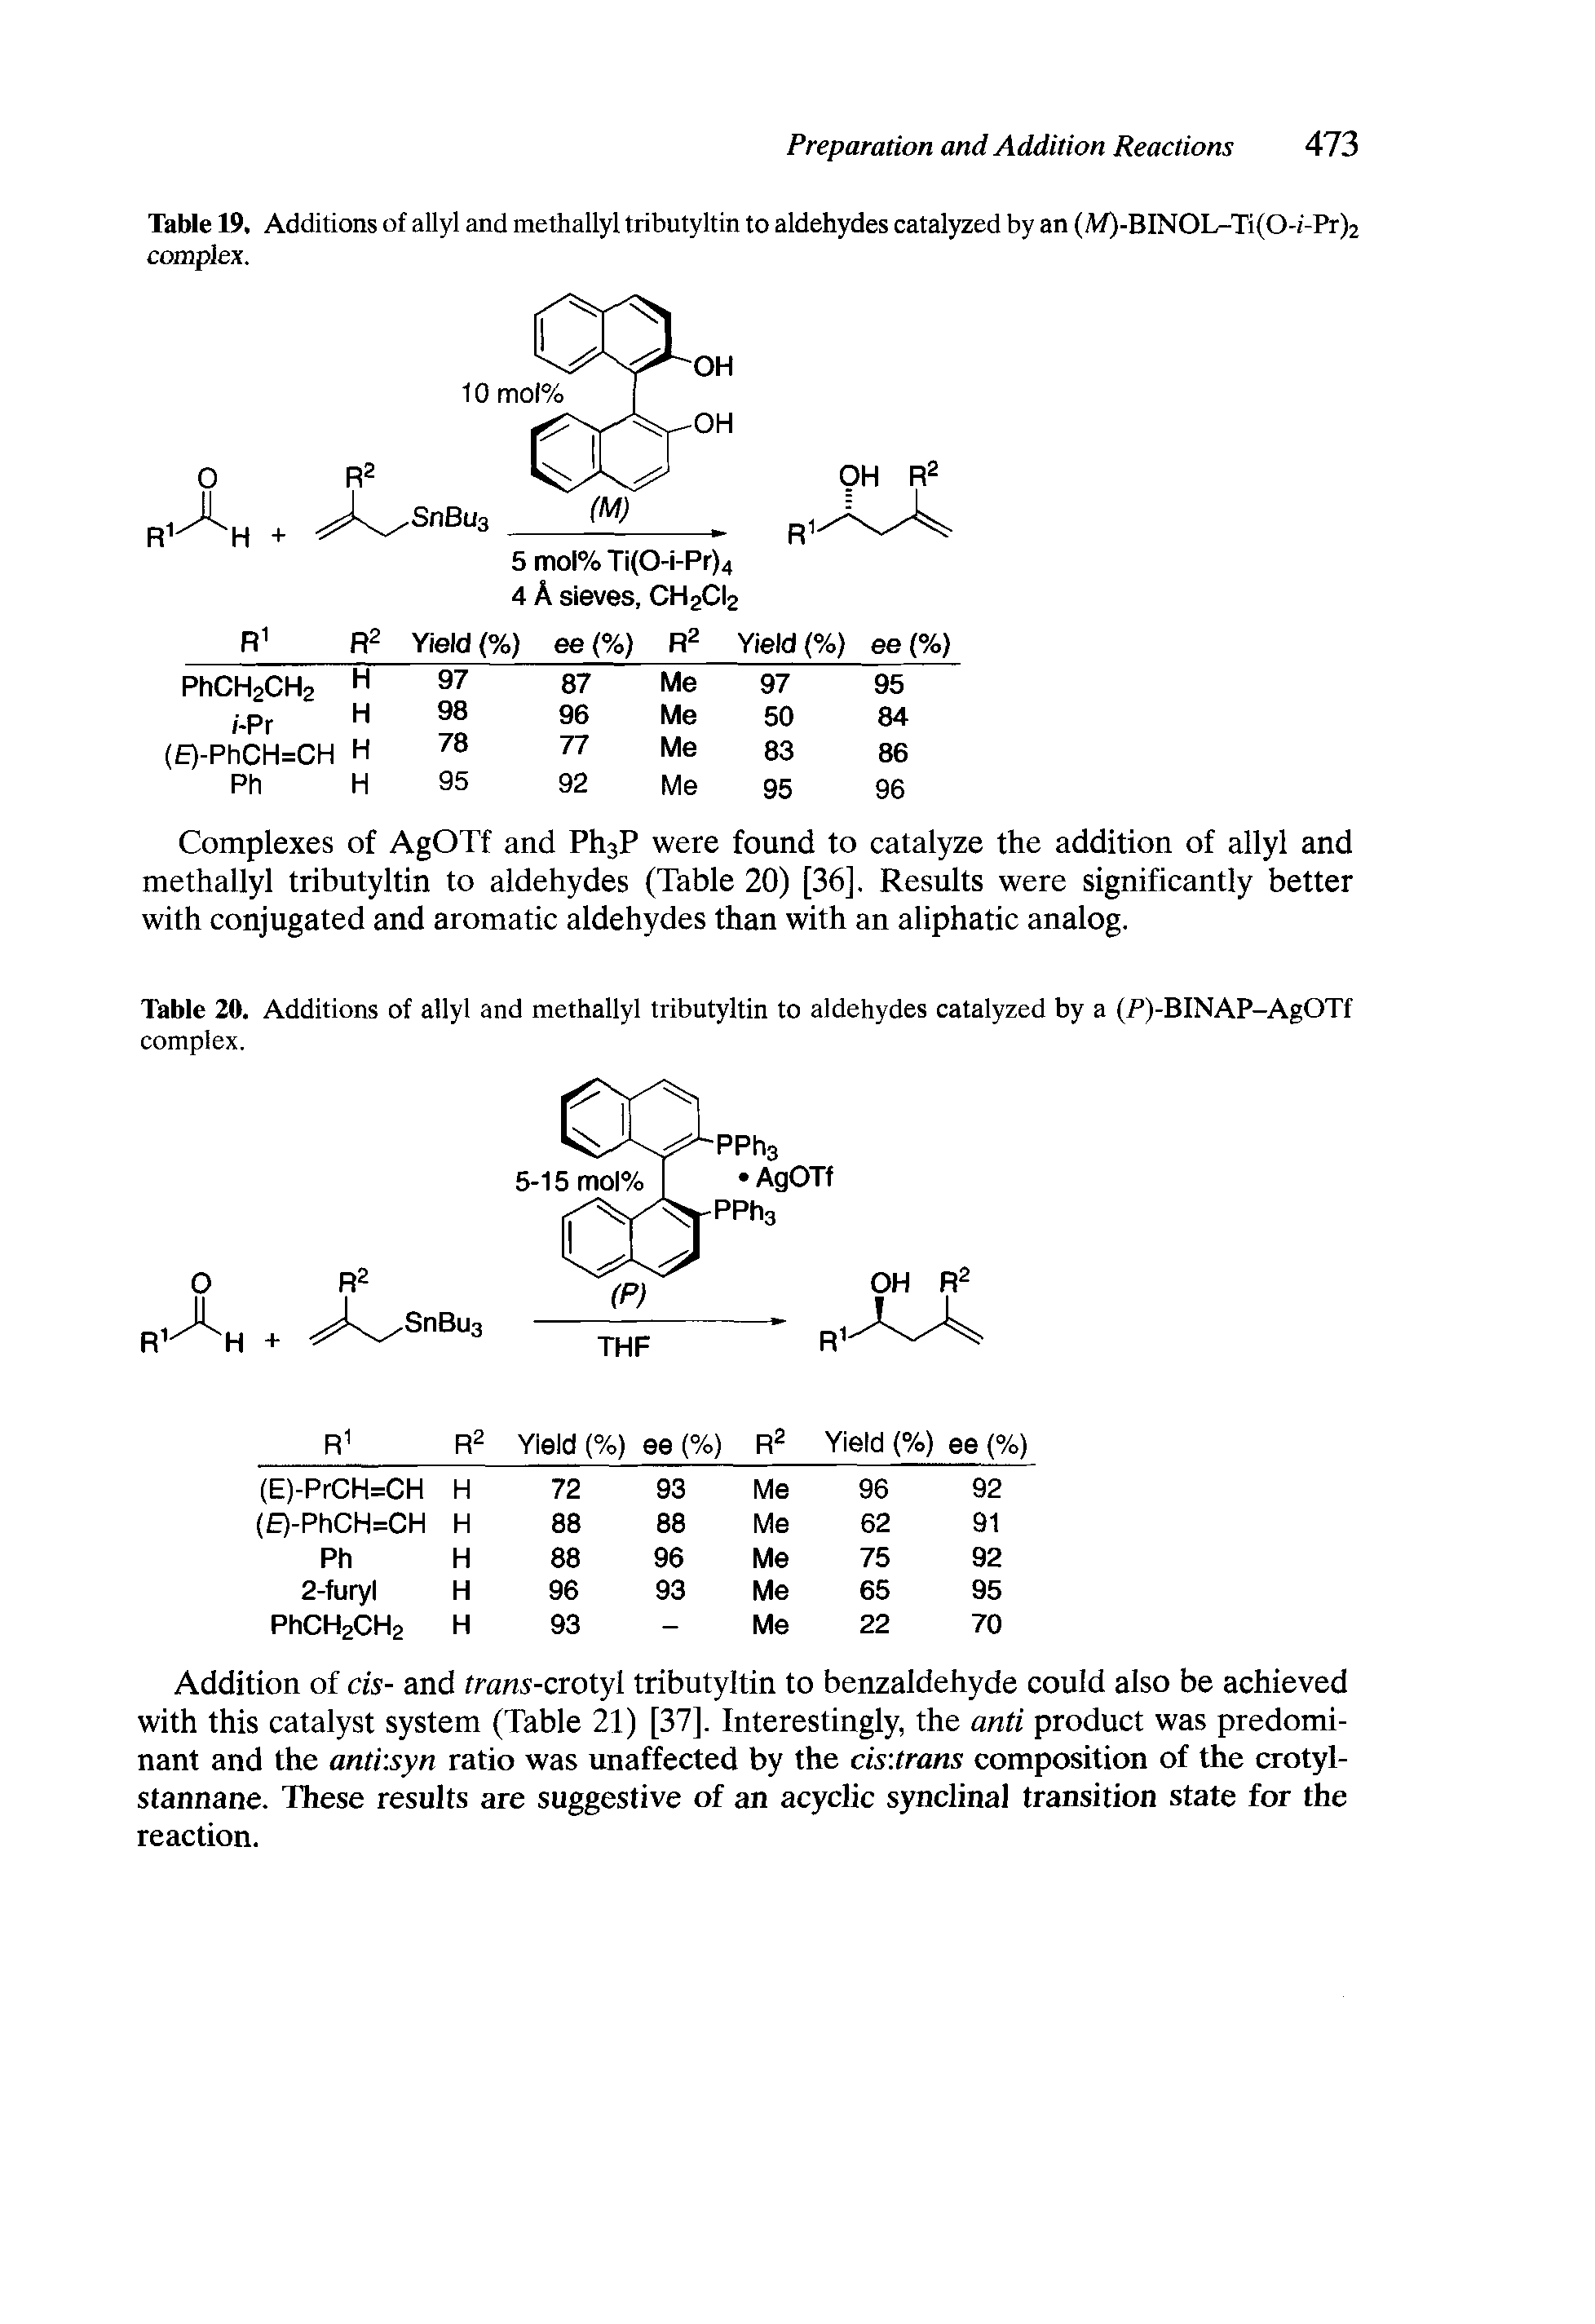 Table 20. Additions of allyl and methallyl tributyltin to aldehydes catalyzed by a (P)-BINAP-AgOTf complex.